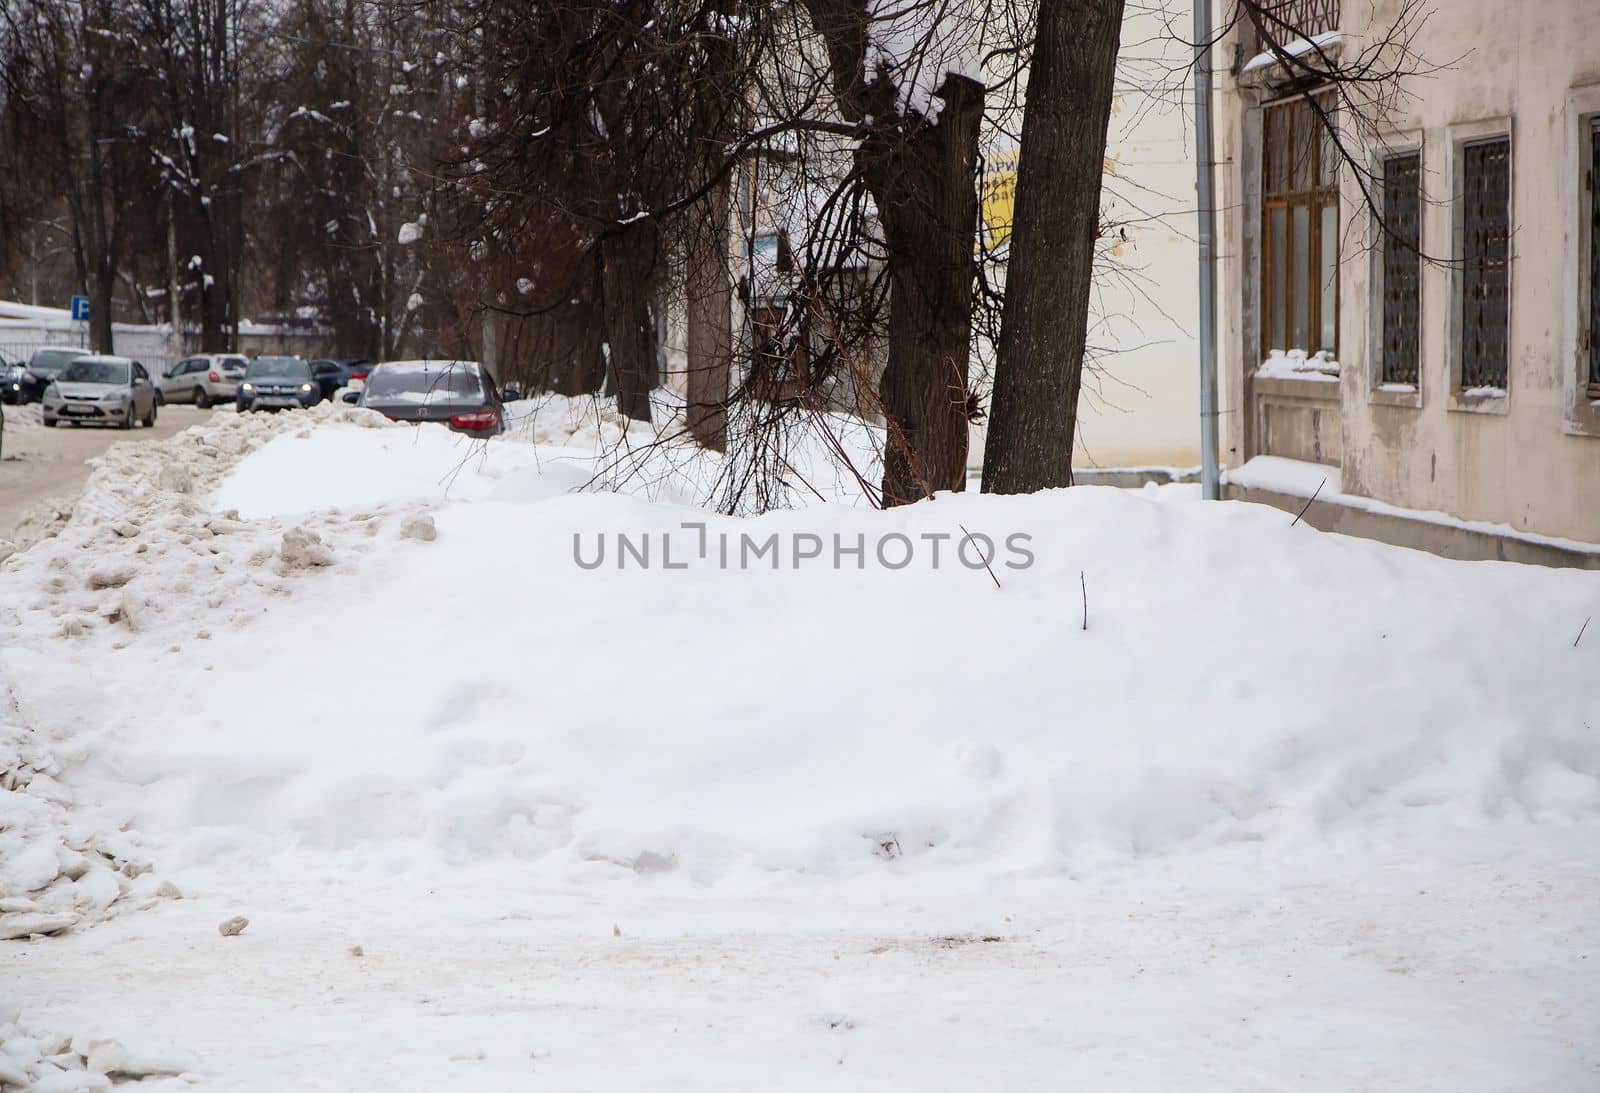 A small snowdrift against the background of a city street with trees. On the road lies white snow in high heaps. Urban winter landscape. Cloudy winter day, soft light.